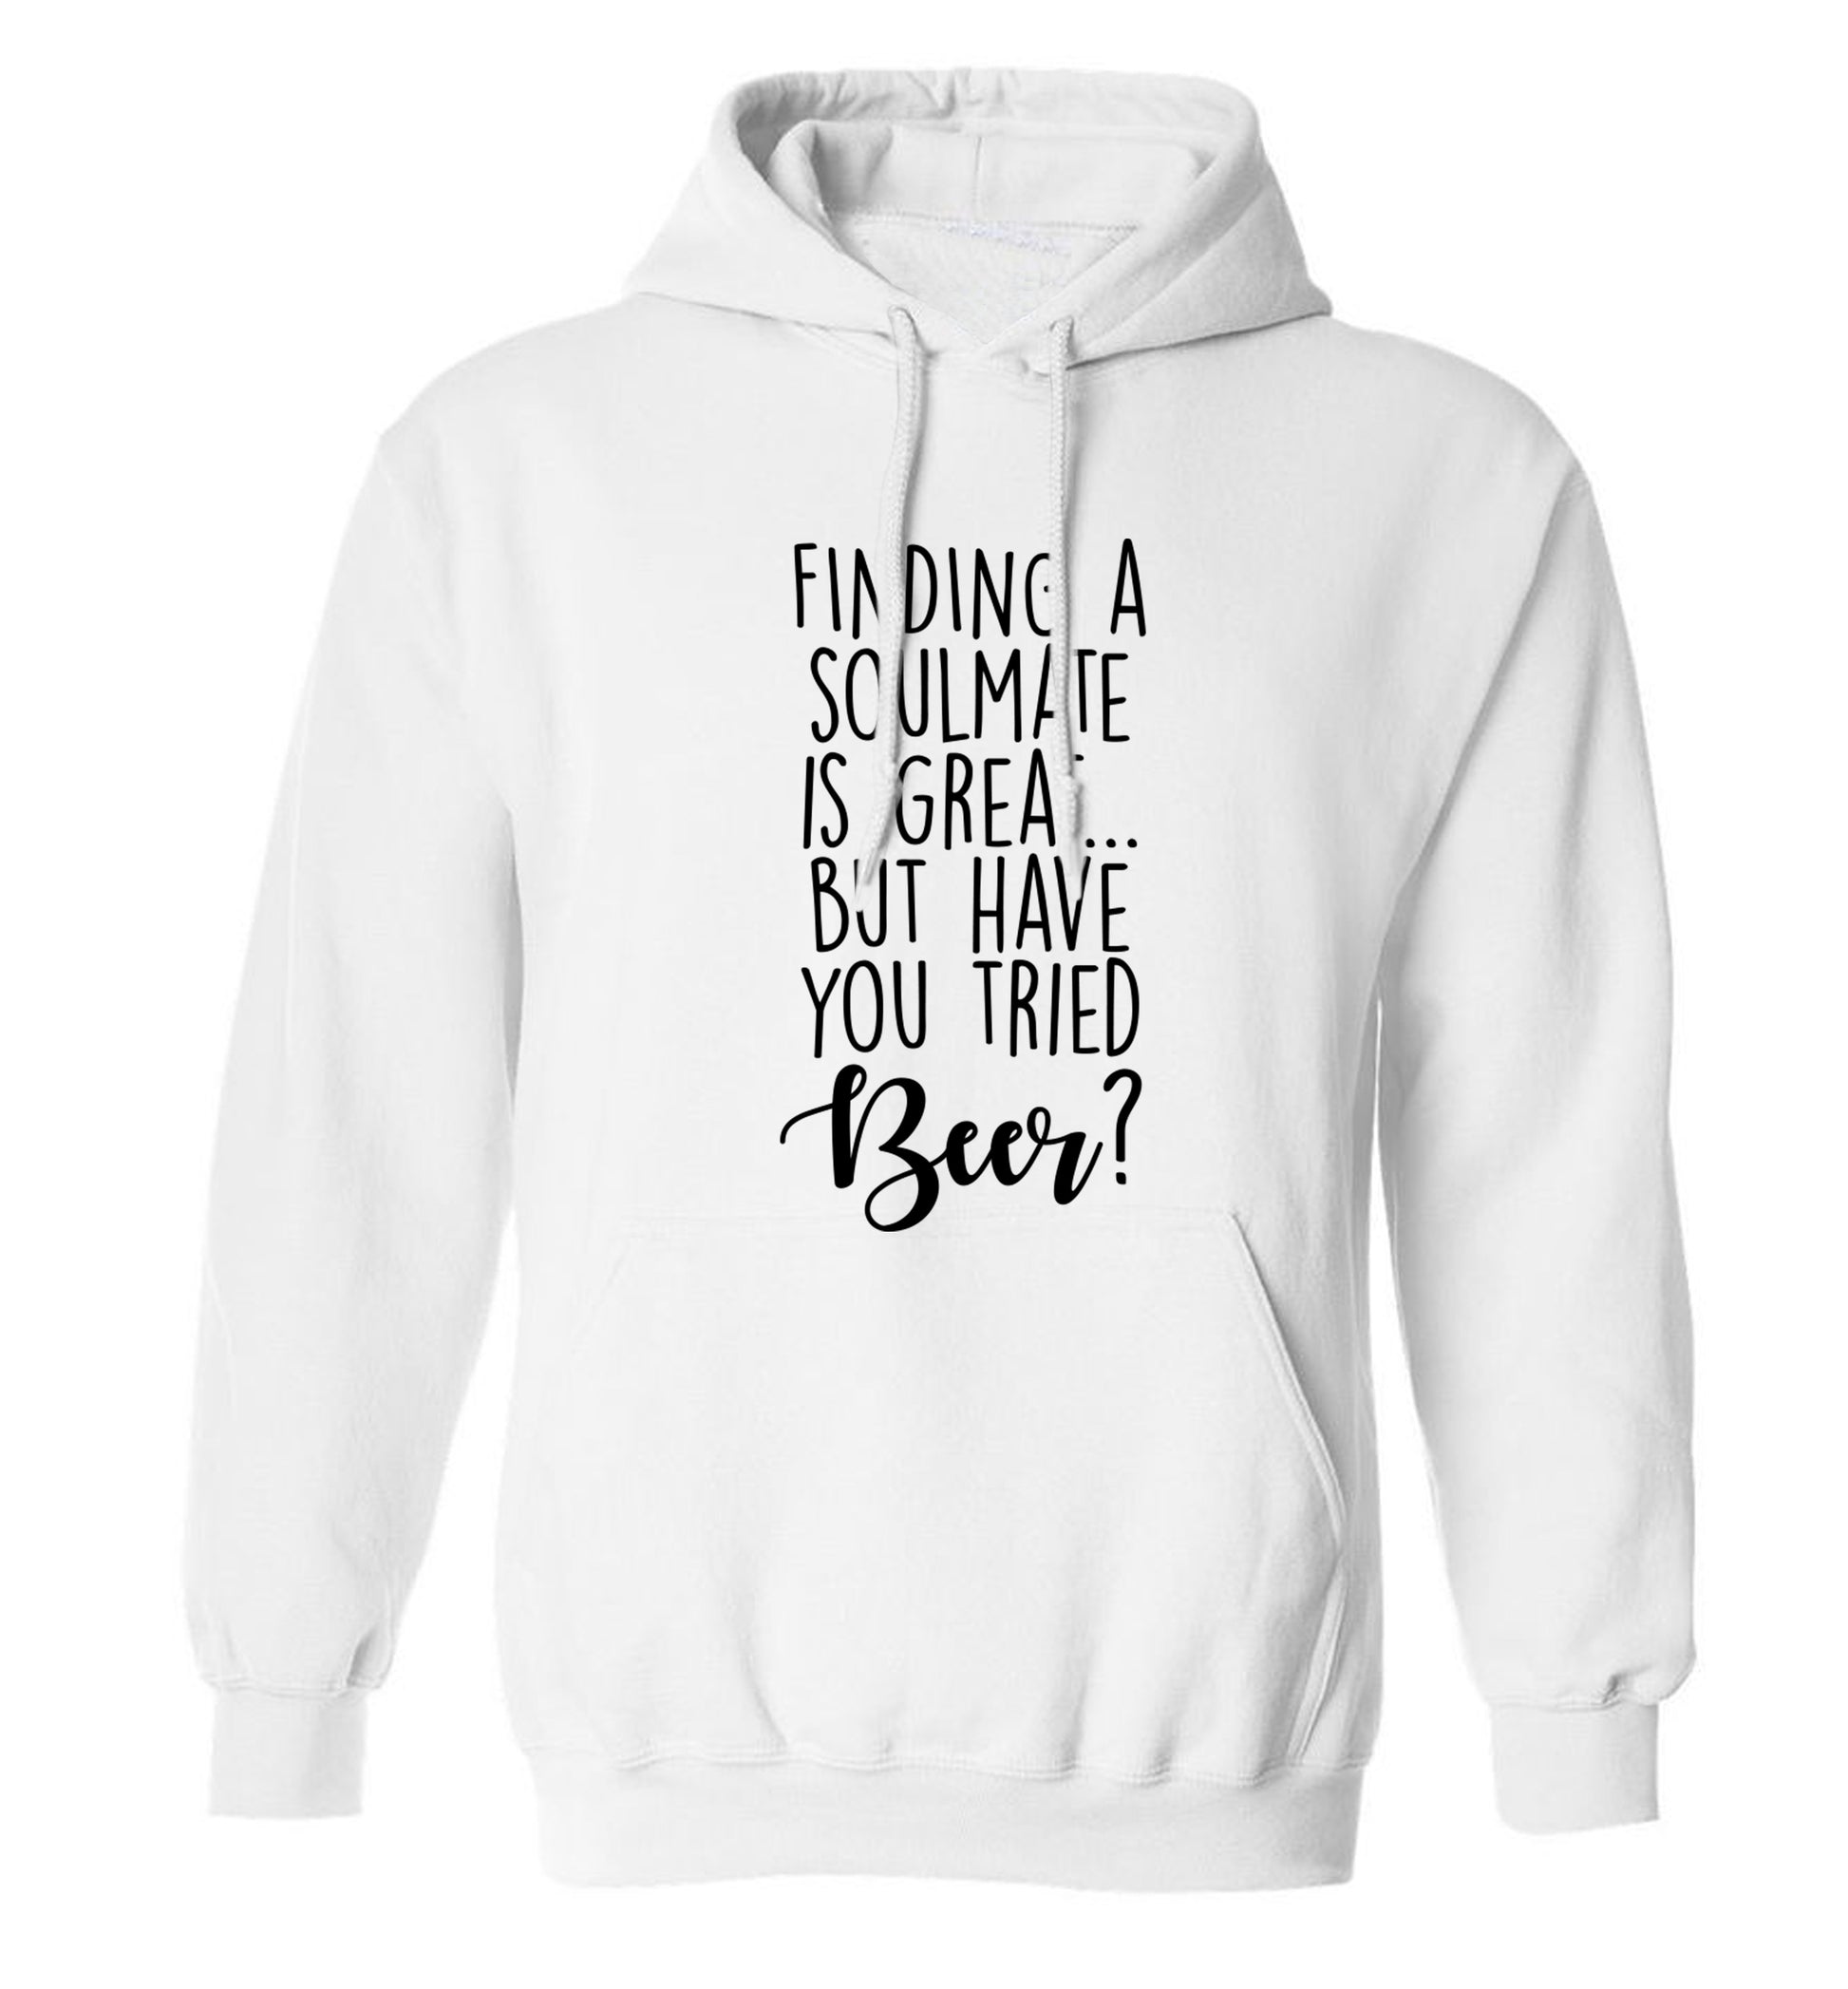 Finding a soulmate is great but have you tried beer? adults unisex white hoodie 2XL